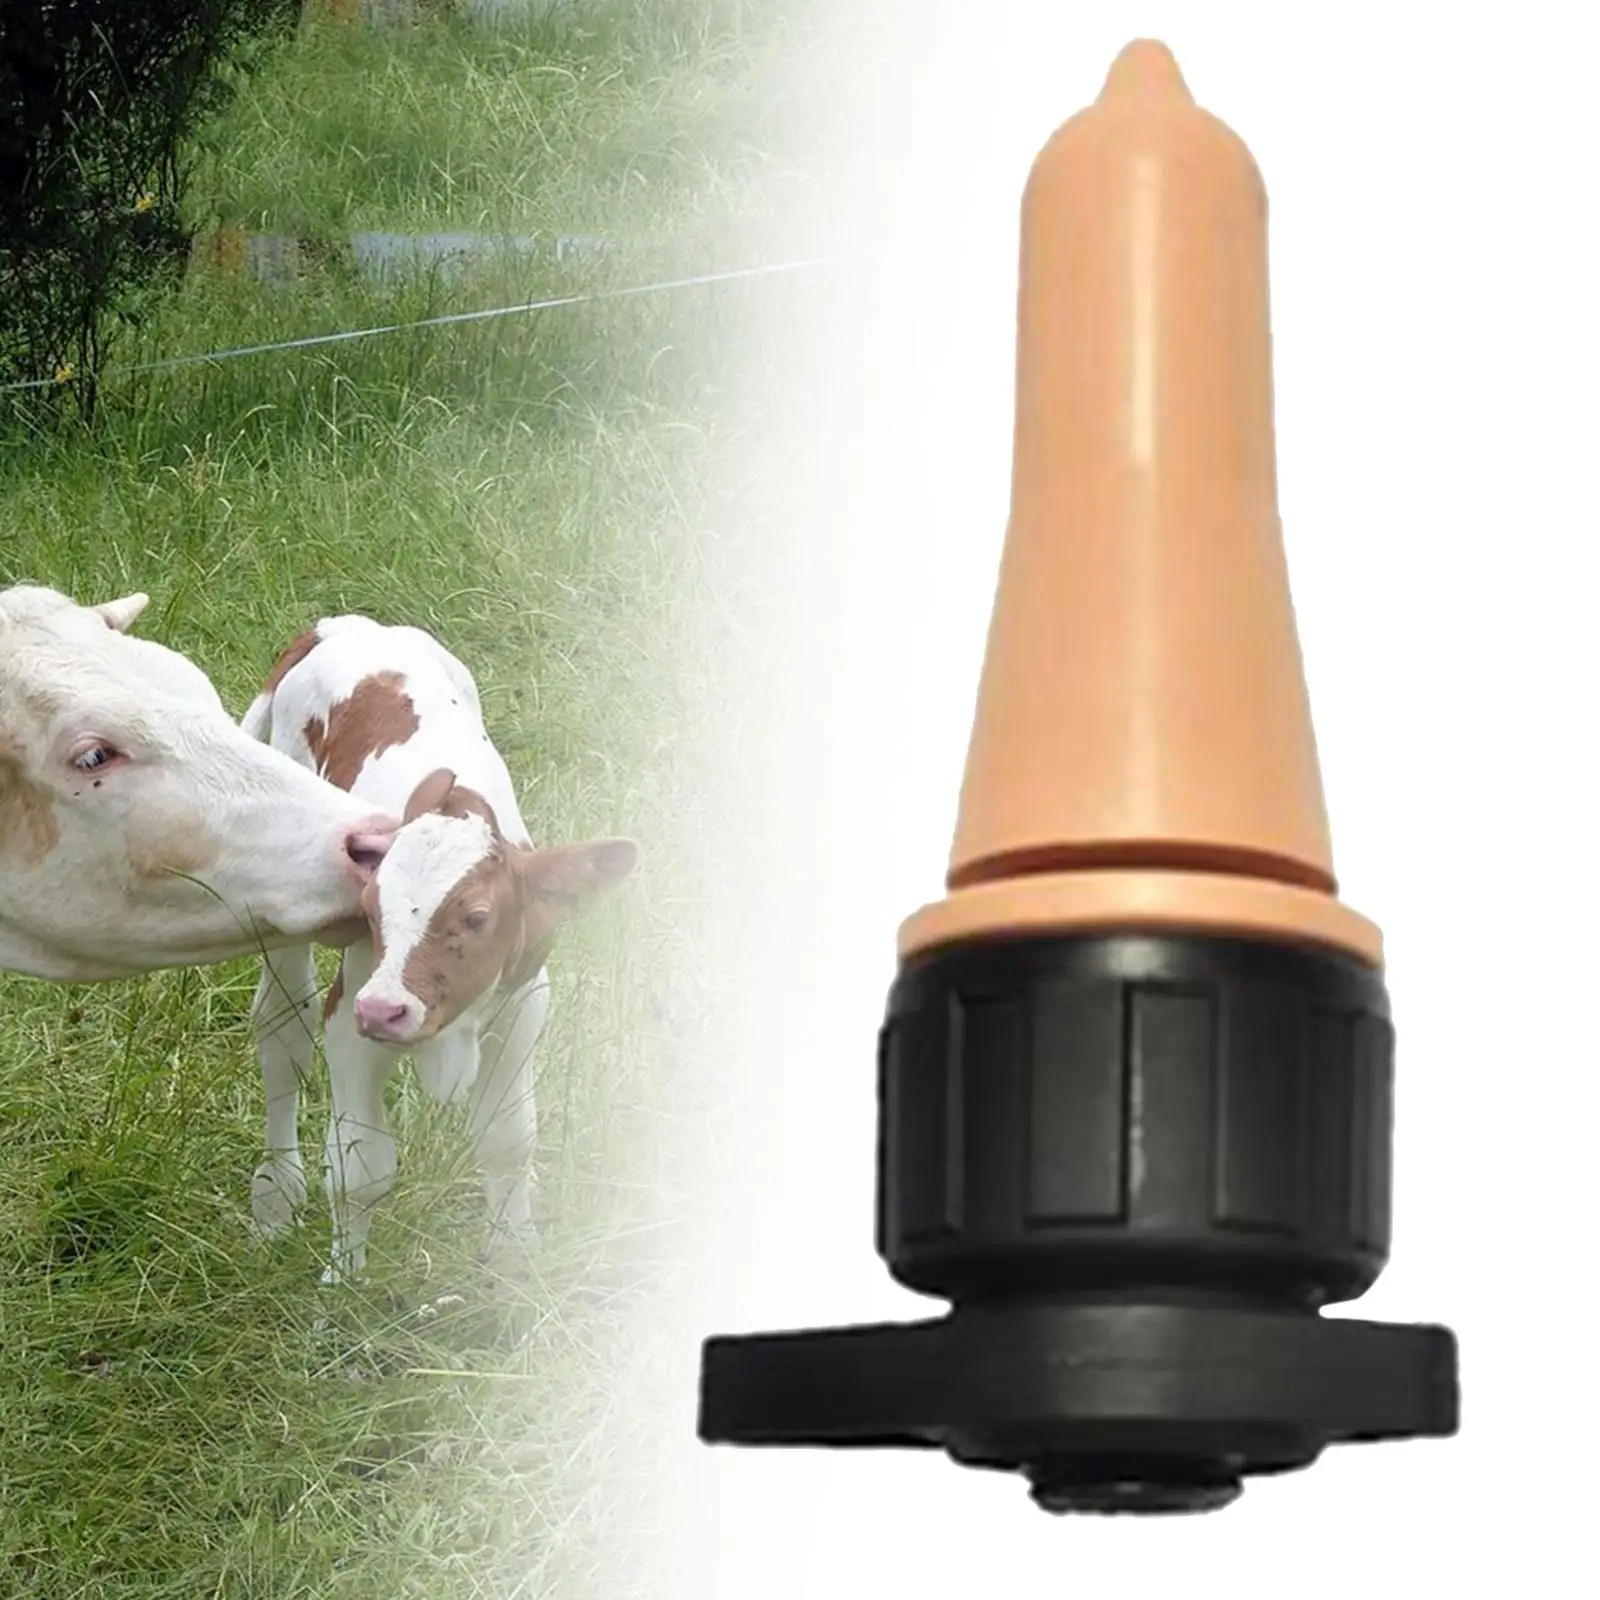 Calf Nipple Peach Teat Soft Rubber Drinking Feeder for Cattle Horse Lamb